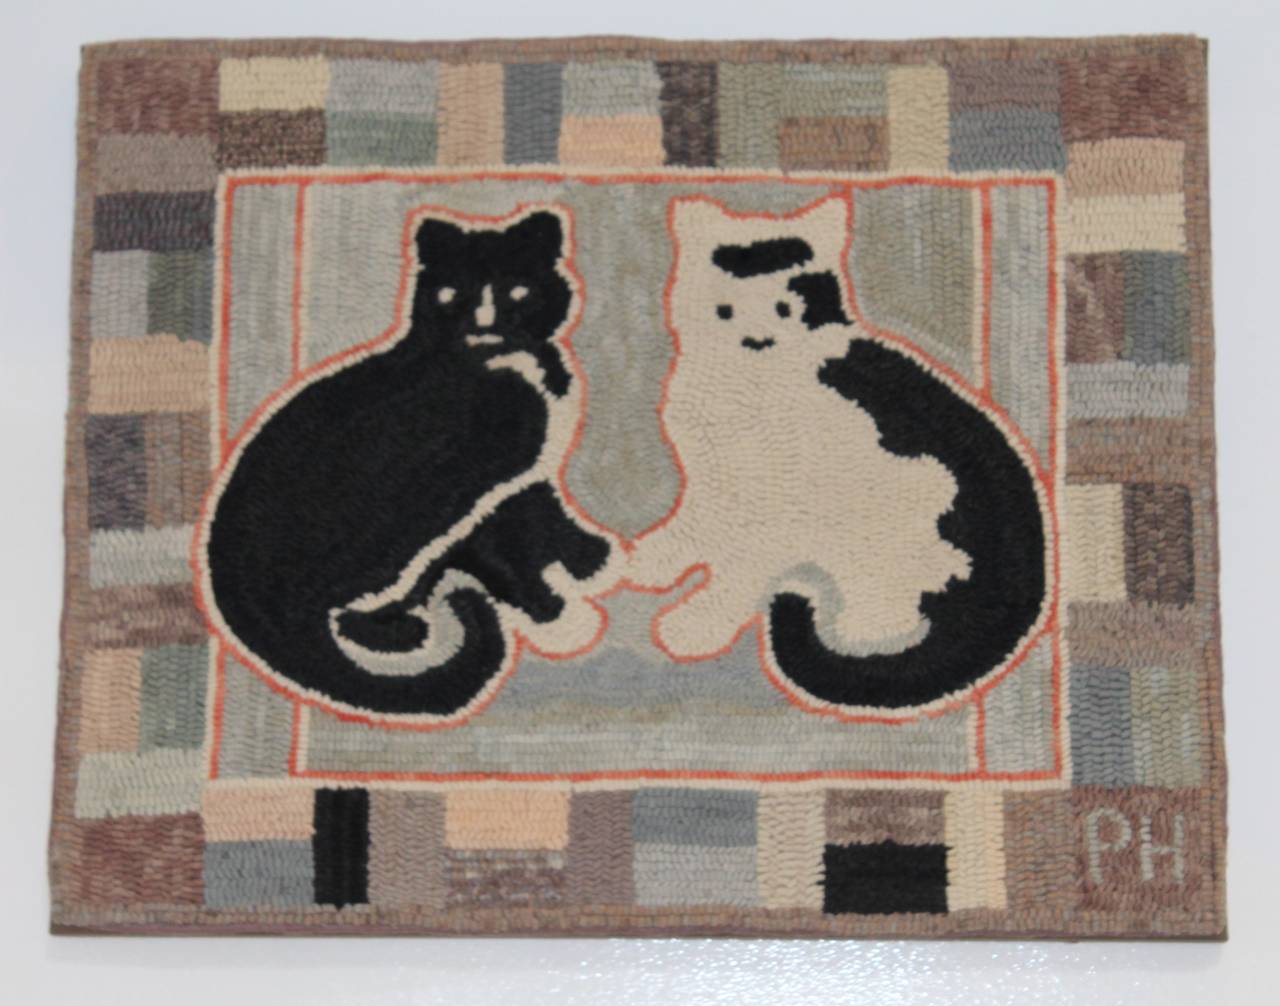 This fun folky hand-hooked pictorial rug was proof mounted and cleaned. This whimsical rug was hooked in calm primary cool light colors. The lower left hand corner the hooker signed her initials PH. We think perhaps it is a male and female cats. The